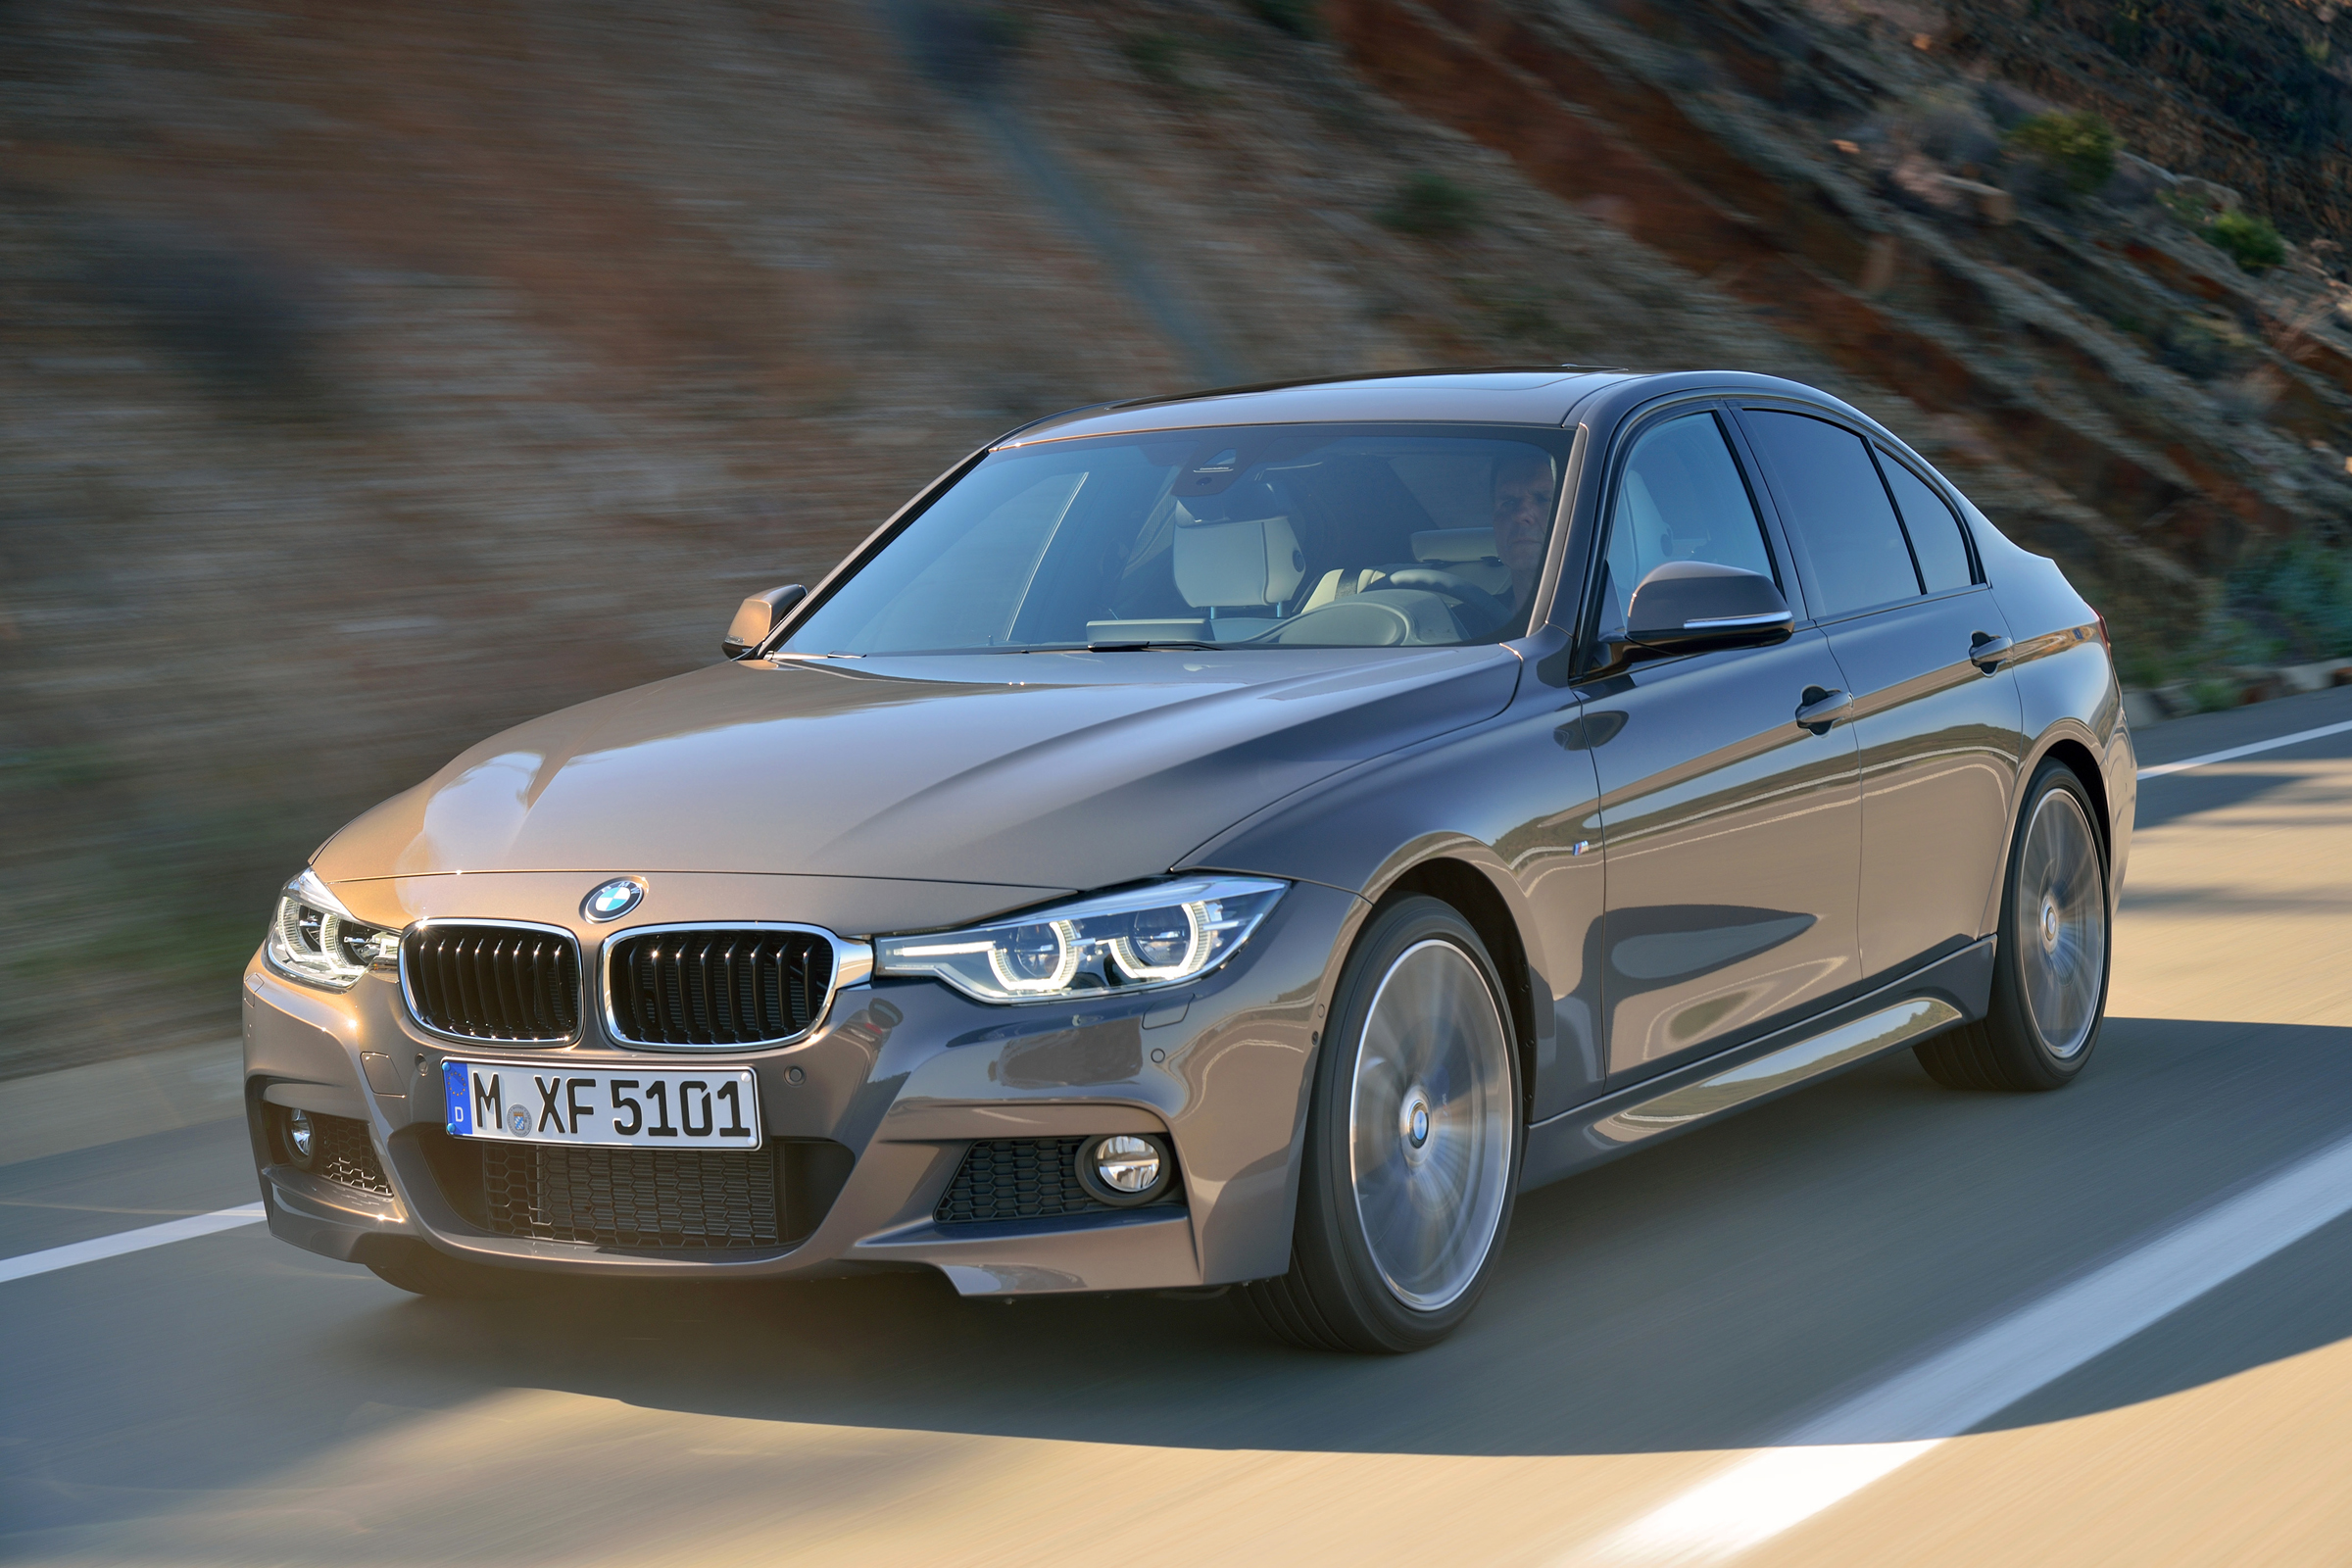 2015 BMW 3 Series saloon and Touring estate unveiled